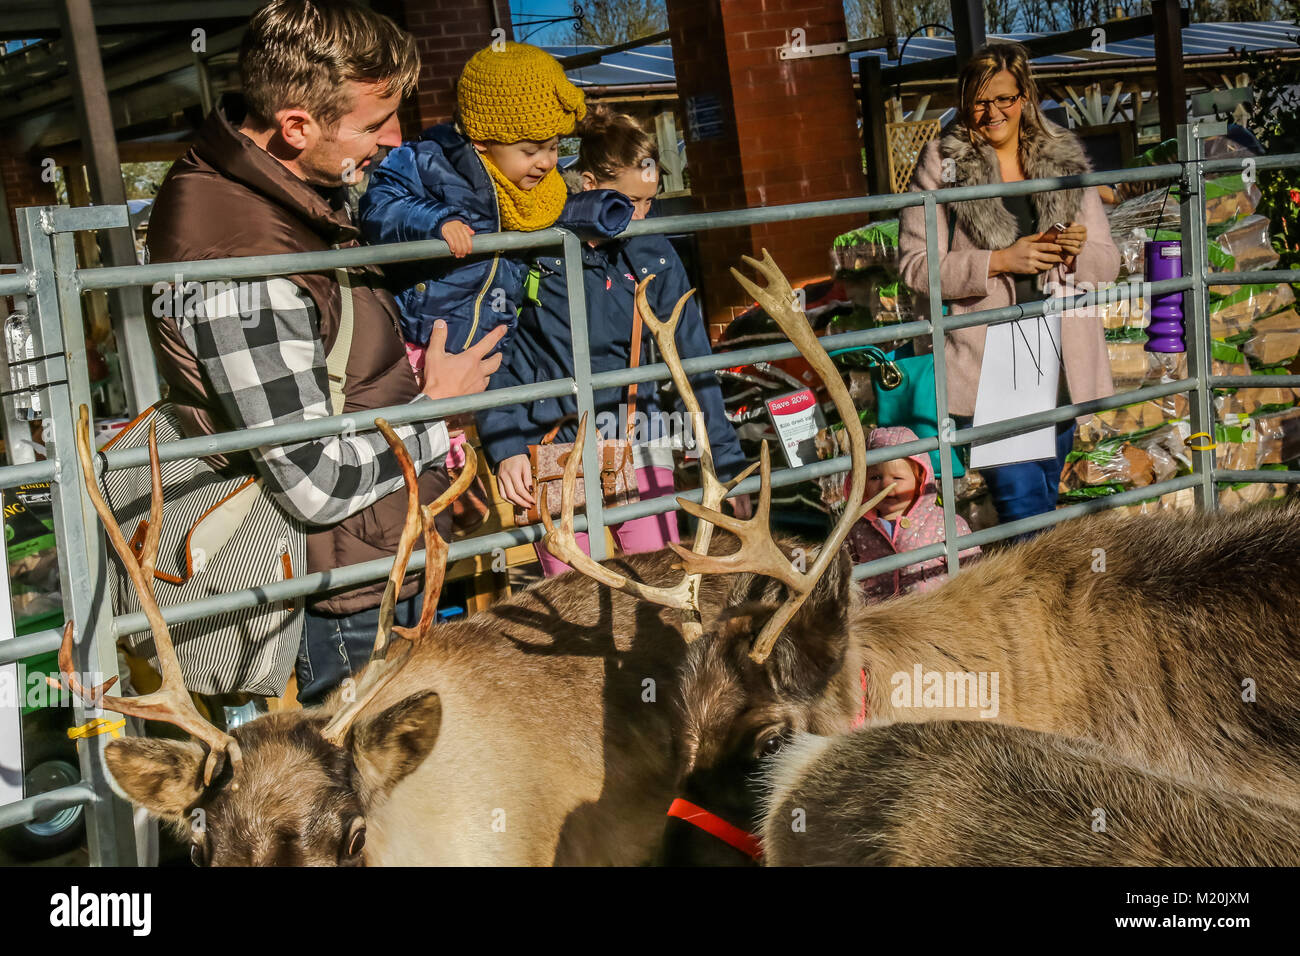 Families with children looking at reindeers at Christmas time Stock Photo